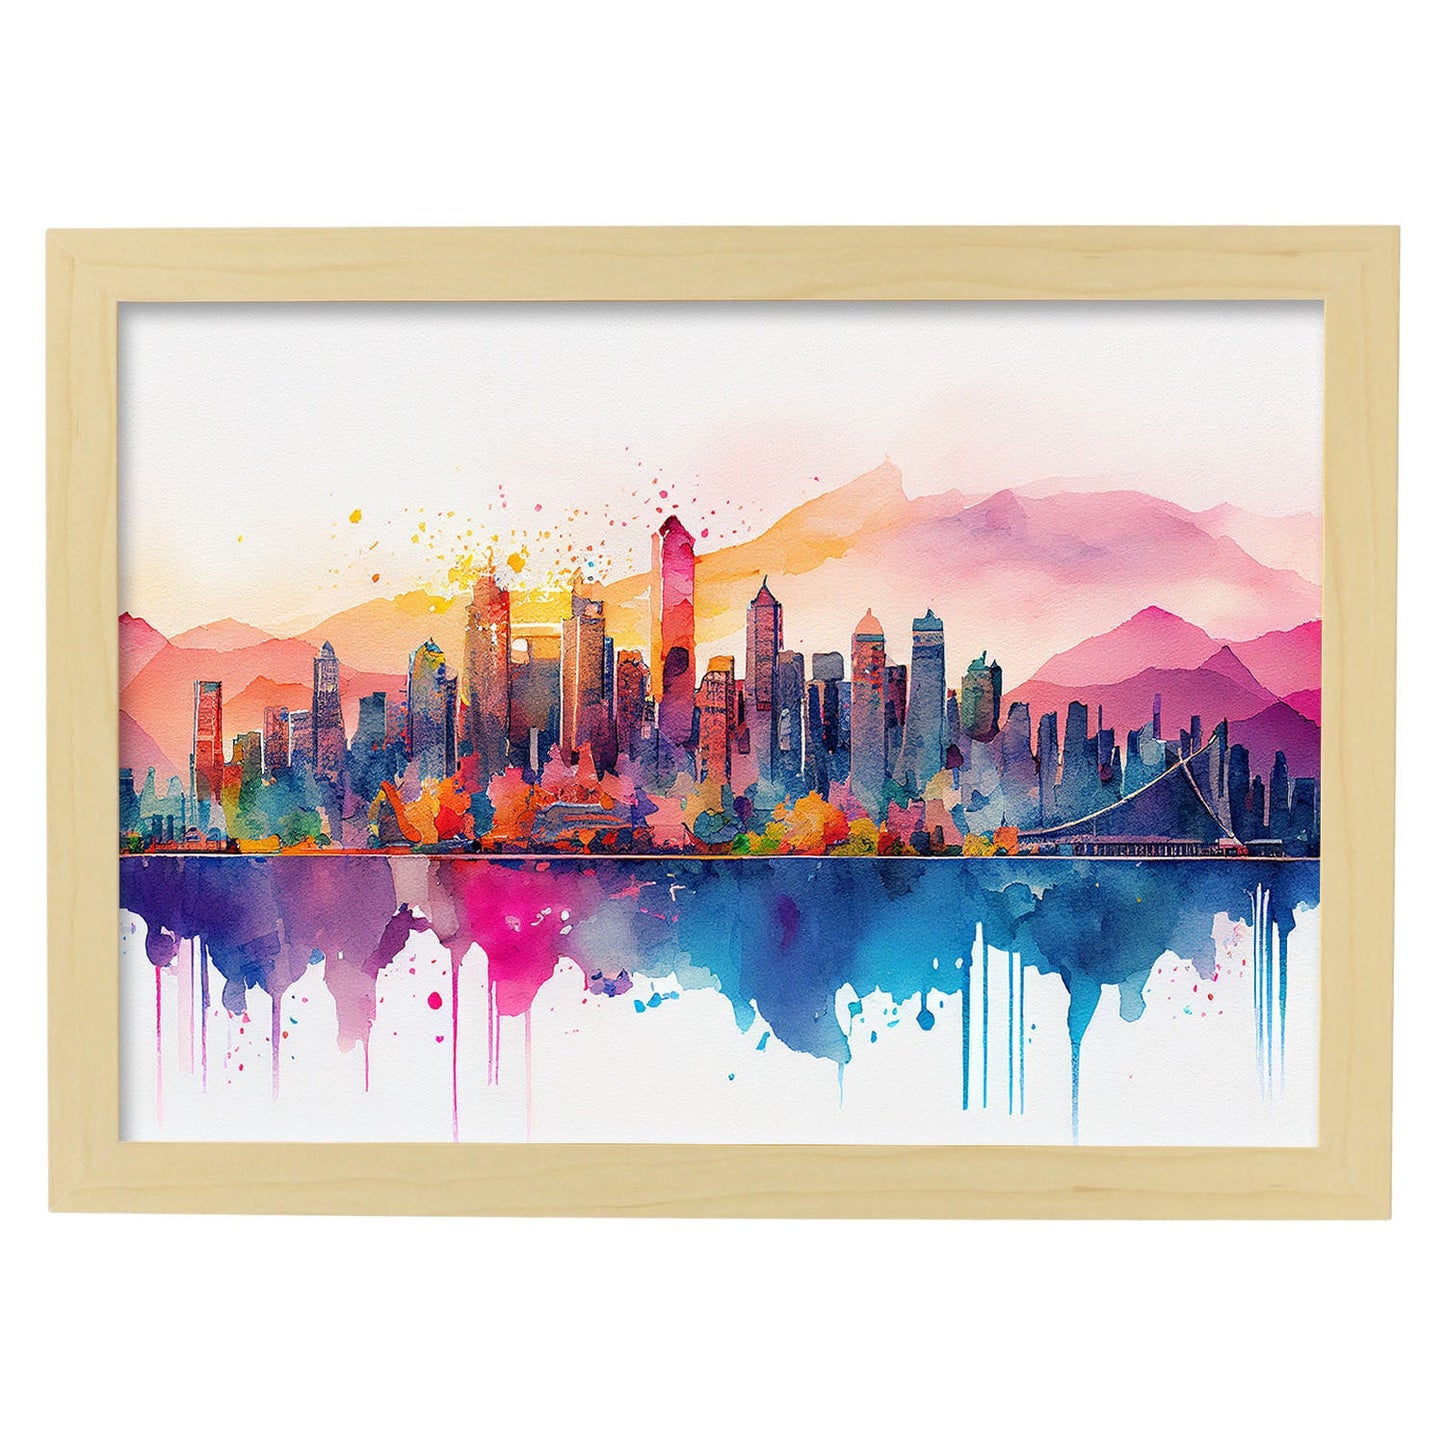 Nacnic watercolor of a skyline of the city of Vancouver. Aesthetic Wall Art Prints for Bedroom or Living Room Design.-Artwork-Nacnic-A4-Marco Madera Clara-Nacnic Estudio SL